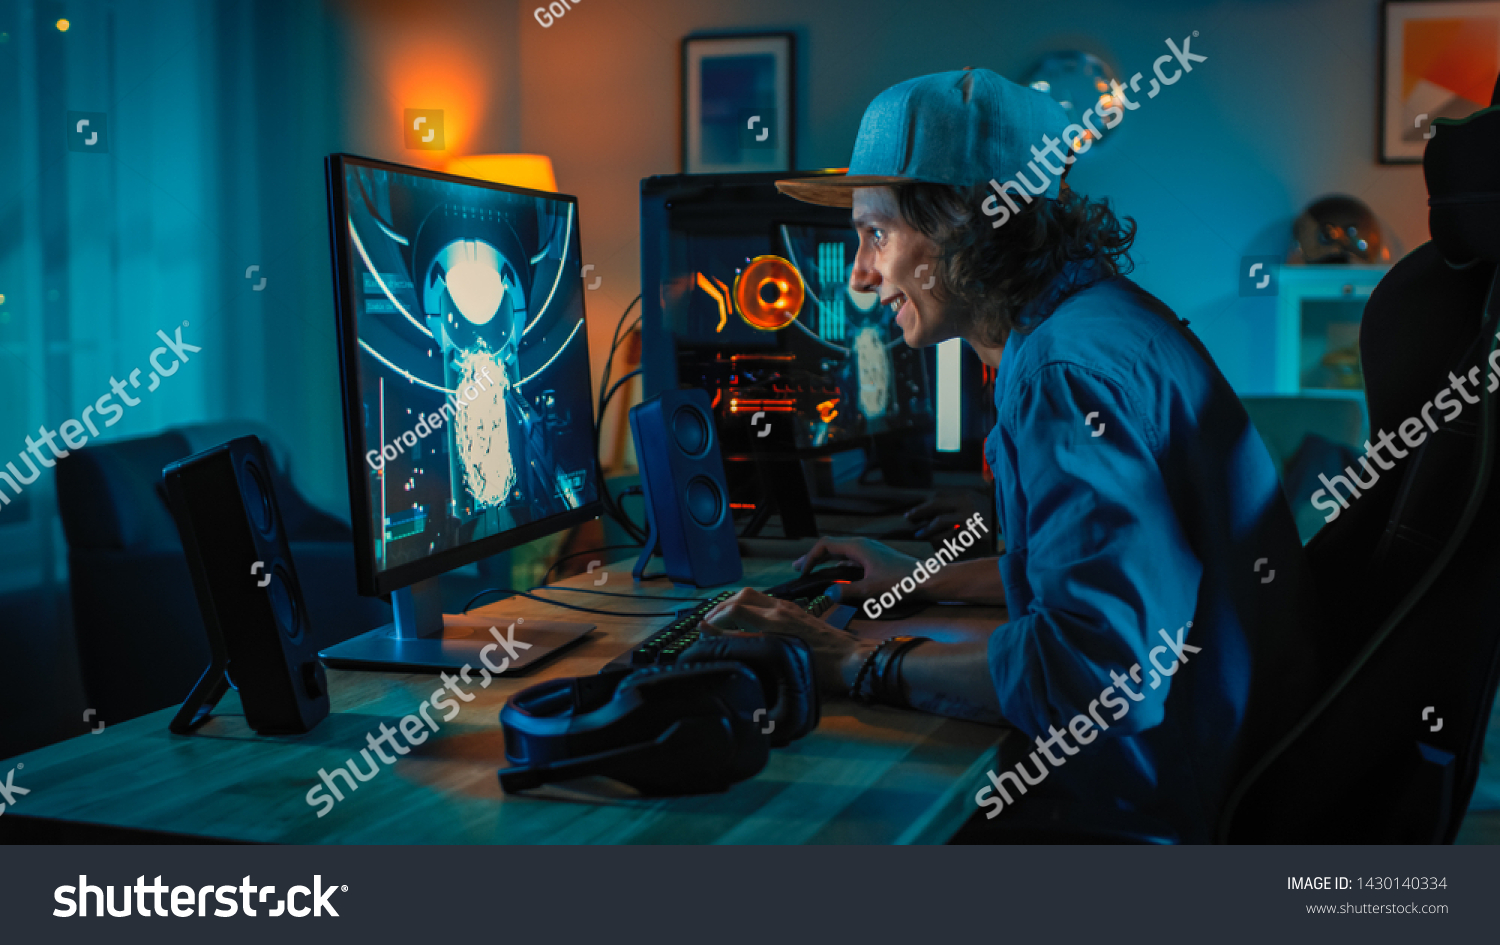 Professional Gamer Playing First-Person Shooter Online Video Game on His Powerful Personal Computer. Room and PC have Colorful Neon Led Lights. Young Man is Wearing a Cap. Cozy Evening at Home. #1430140334